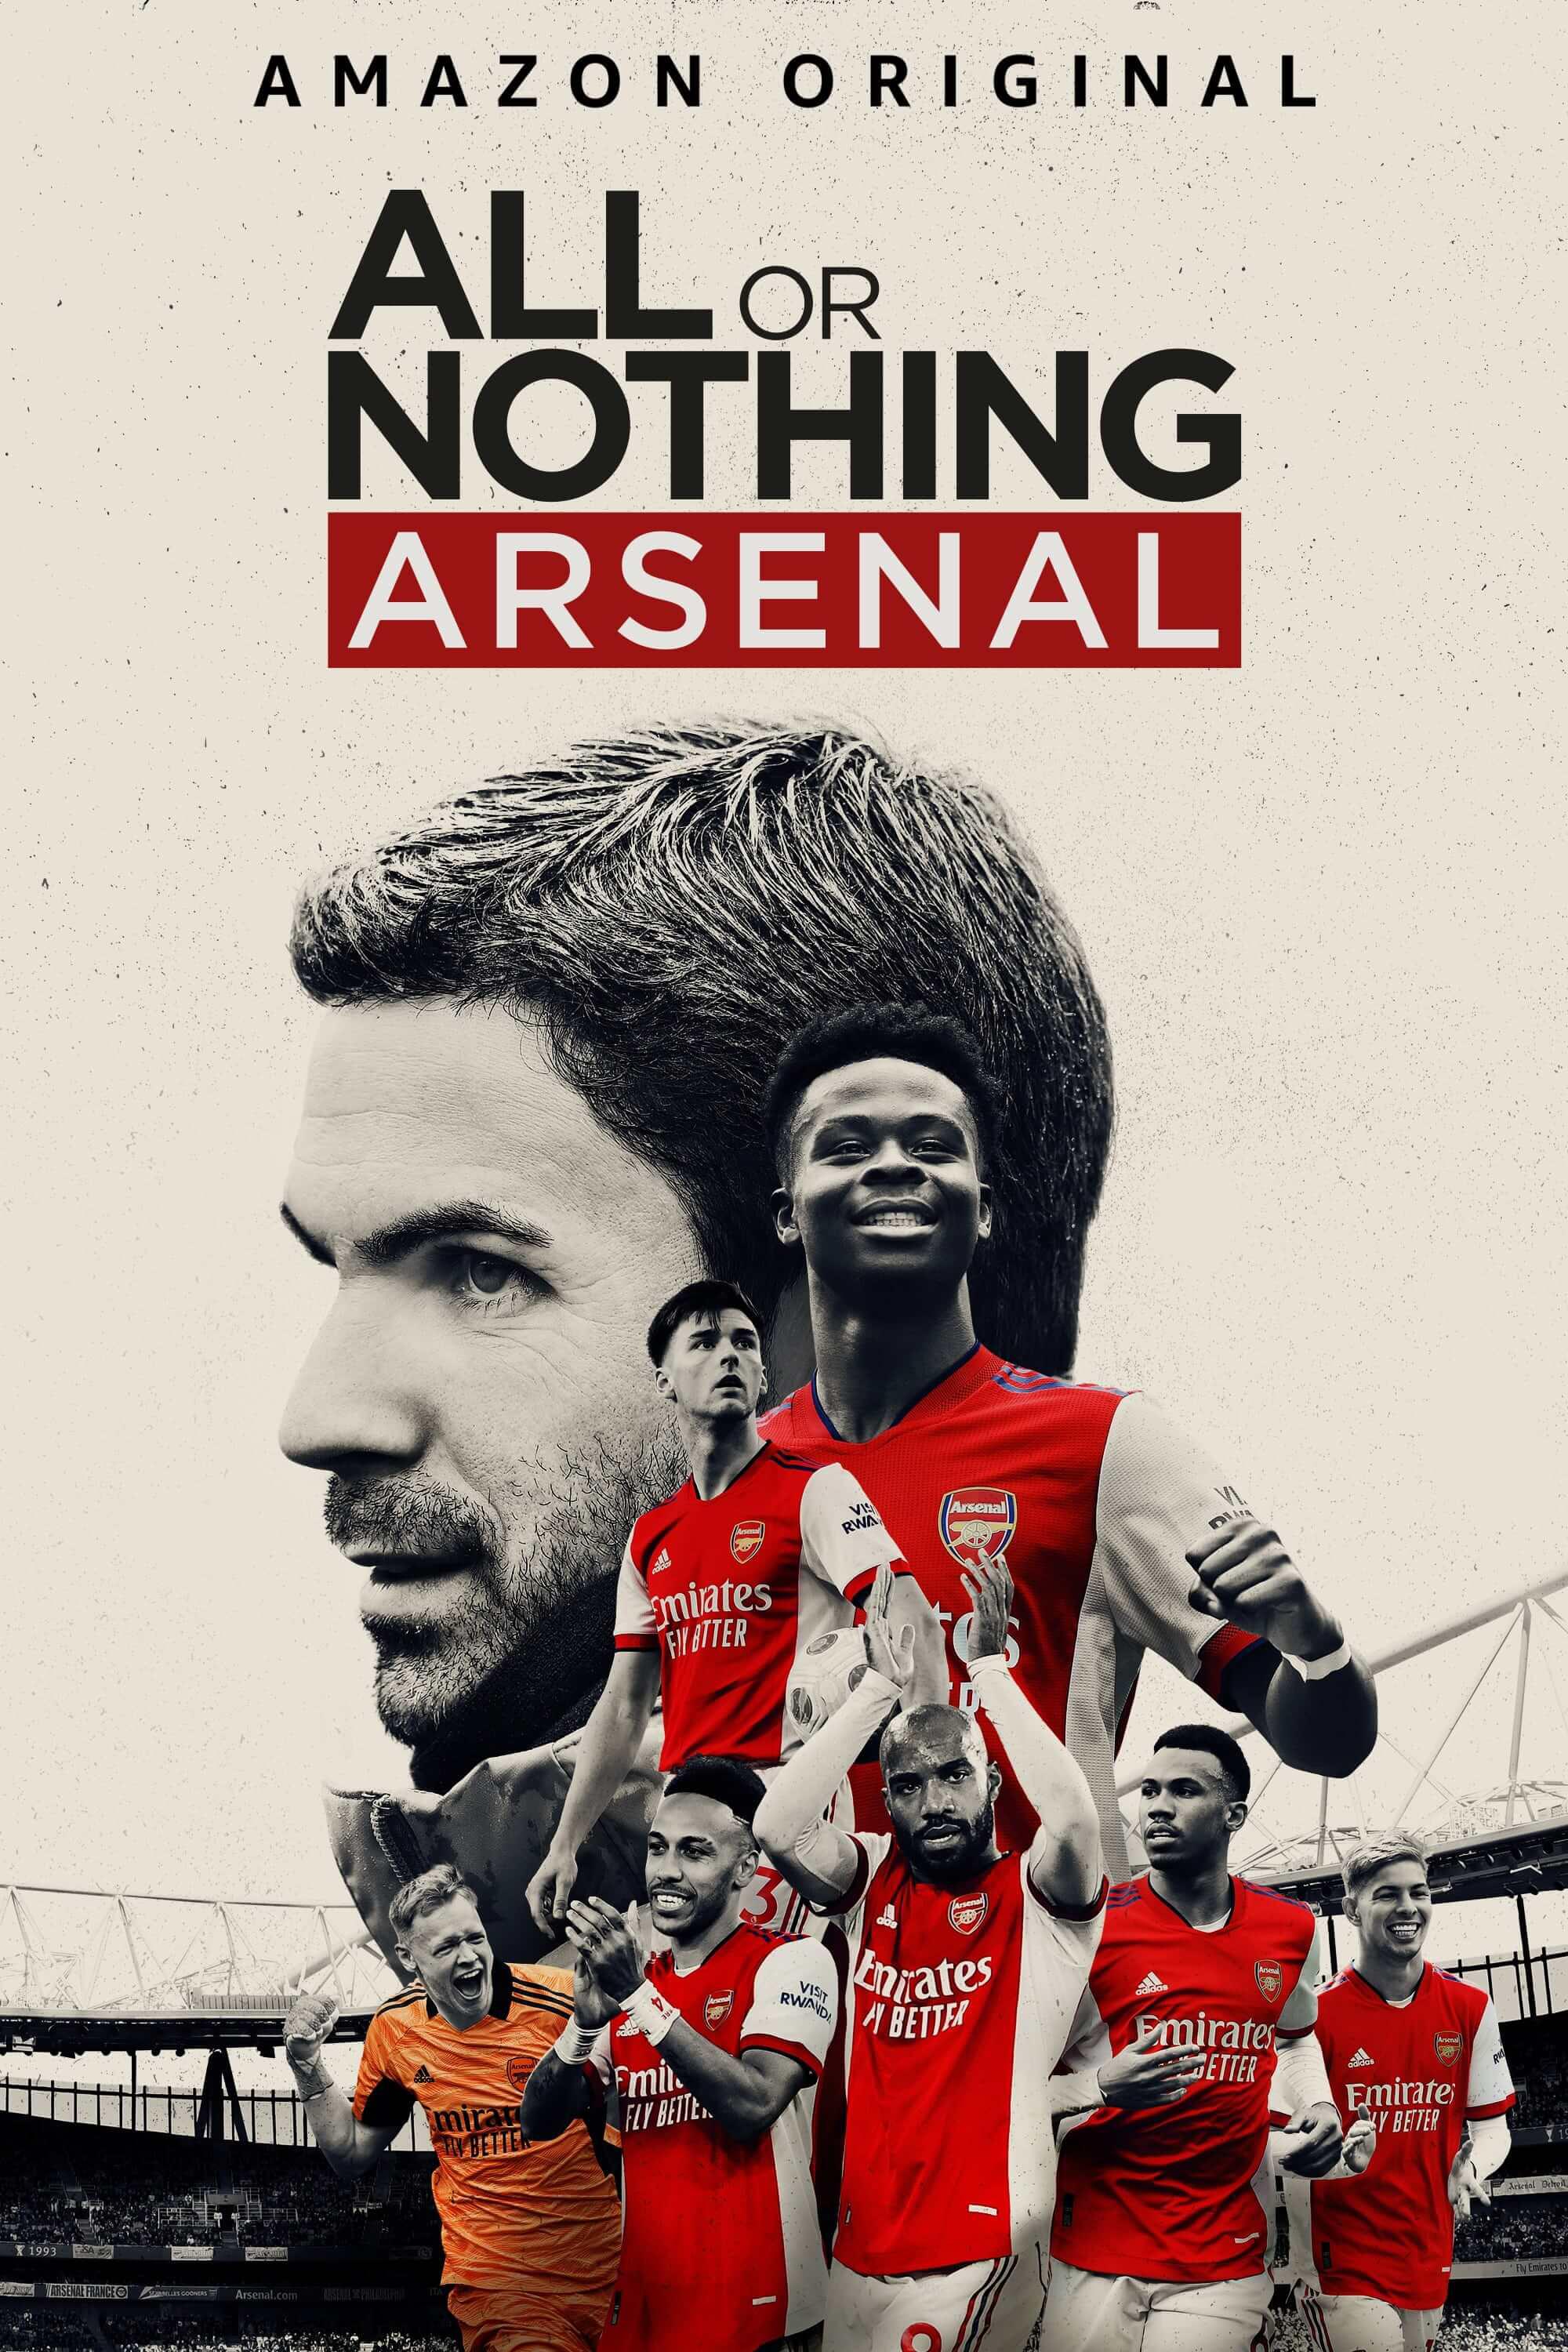 TV ratings for All Or Nothing: Arsenal in the United Kingdom. Amazon Prime Video TV series